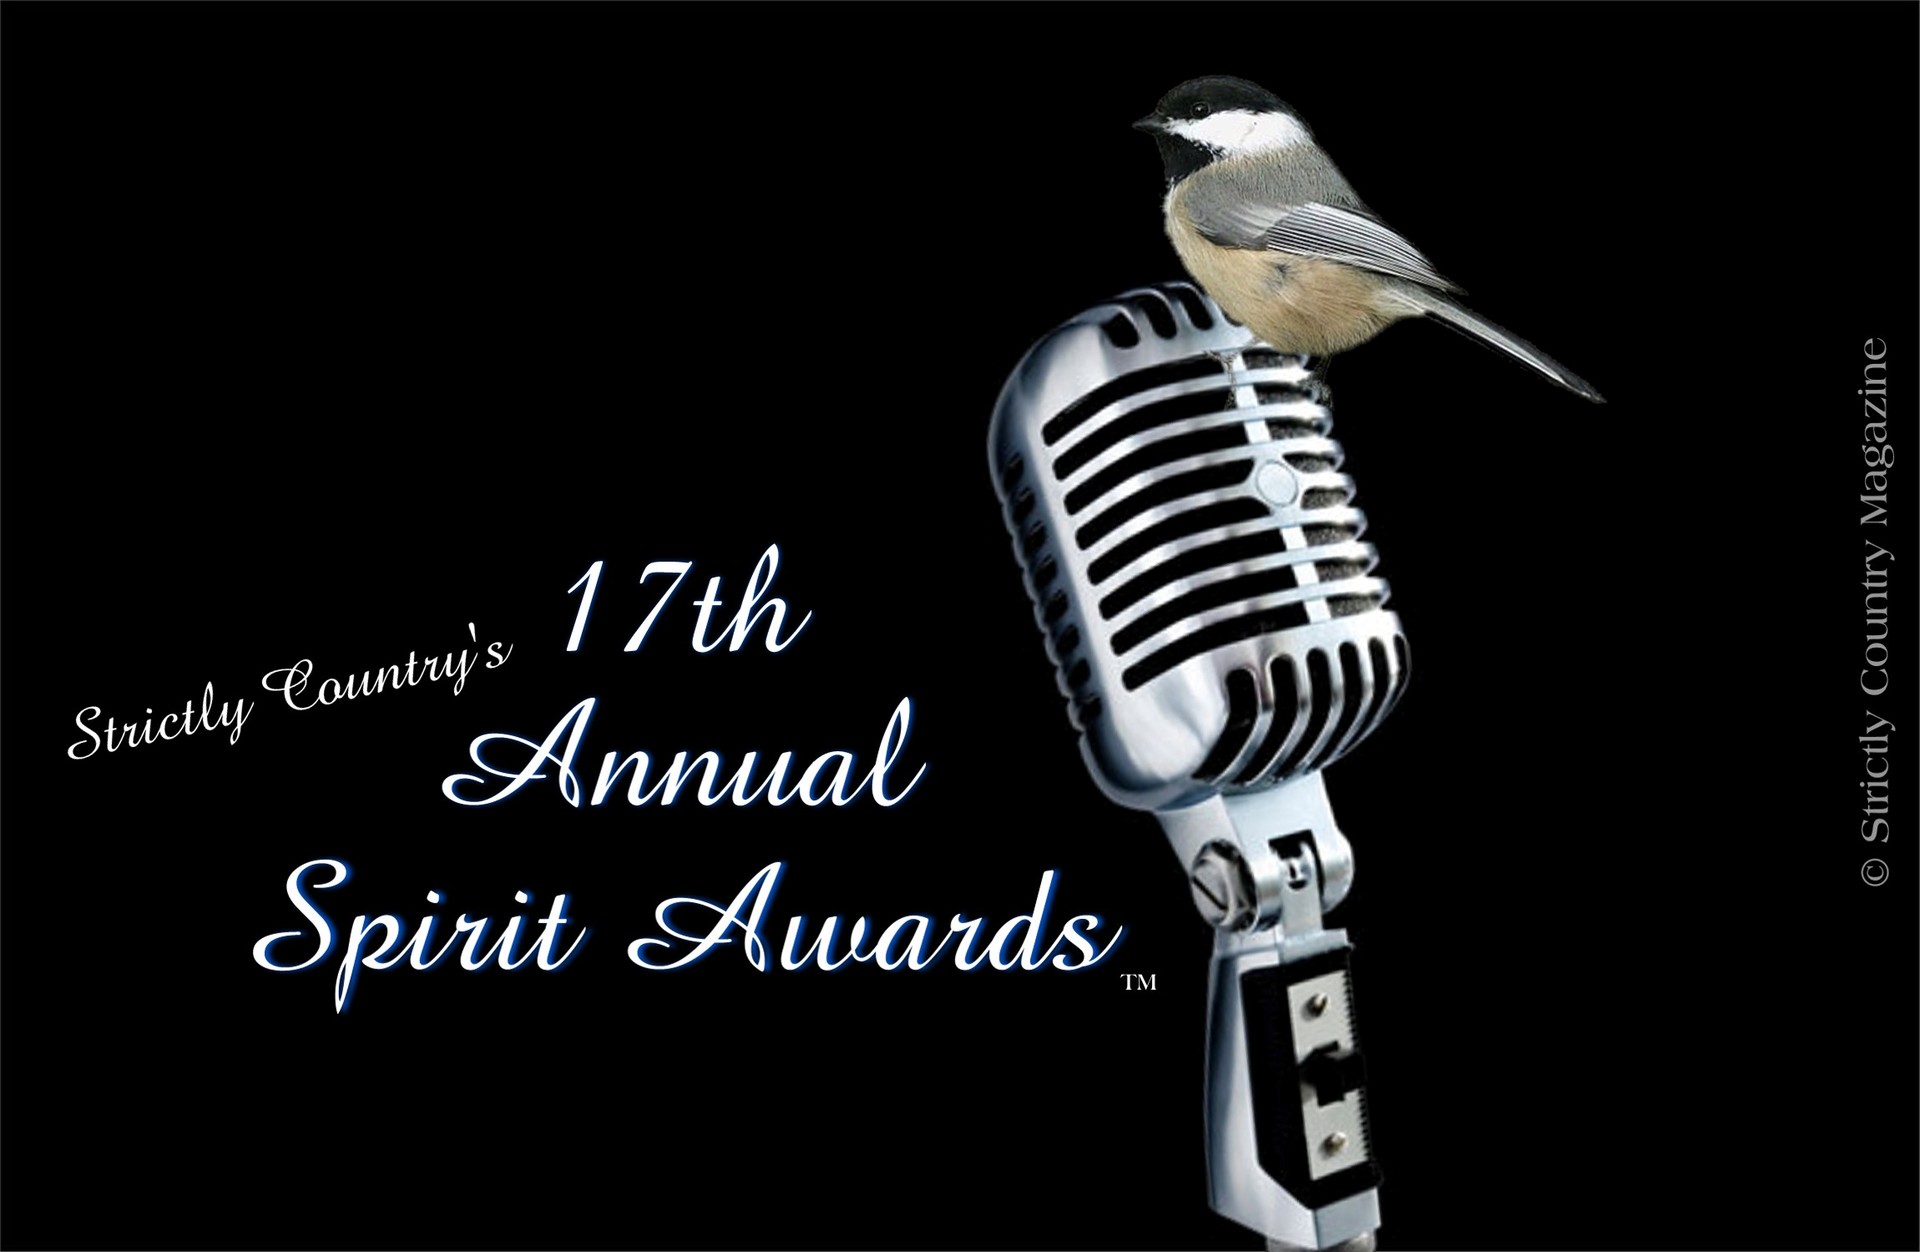 Strictly Country Magazine copyright 17th Annual Spirit Awards official logo